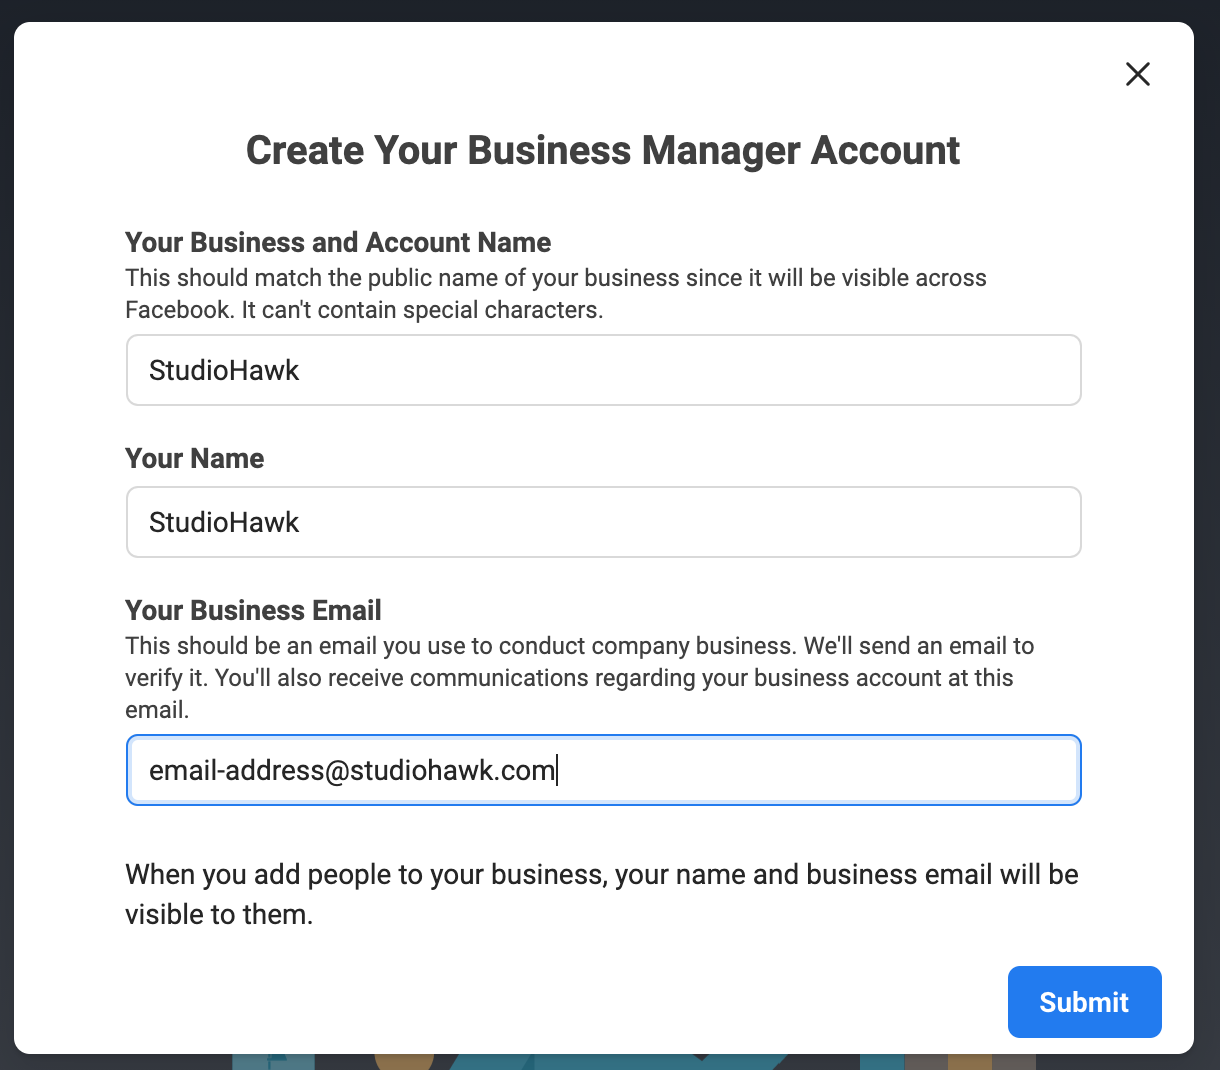 The Ultimate Guide to Facebook Business Manager